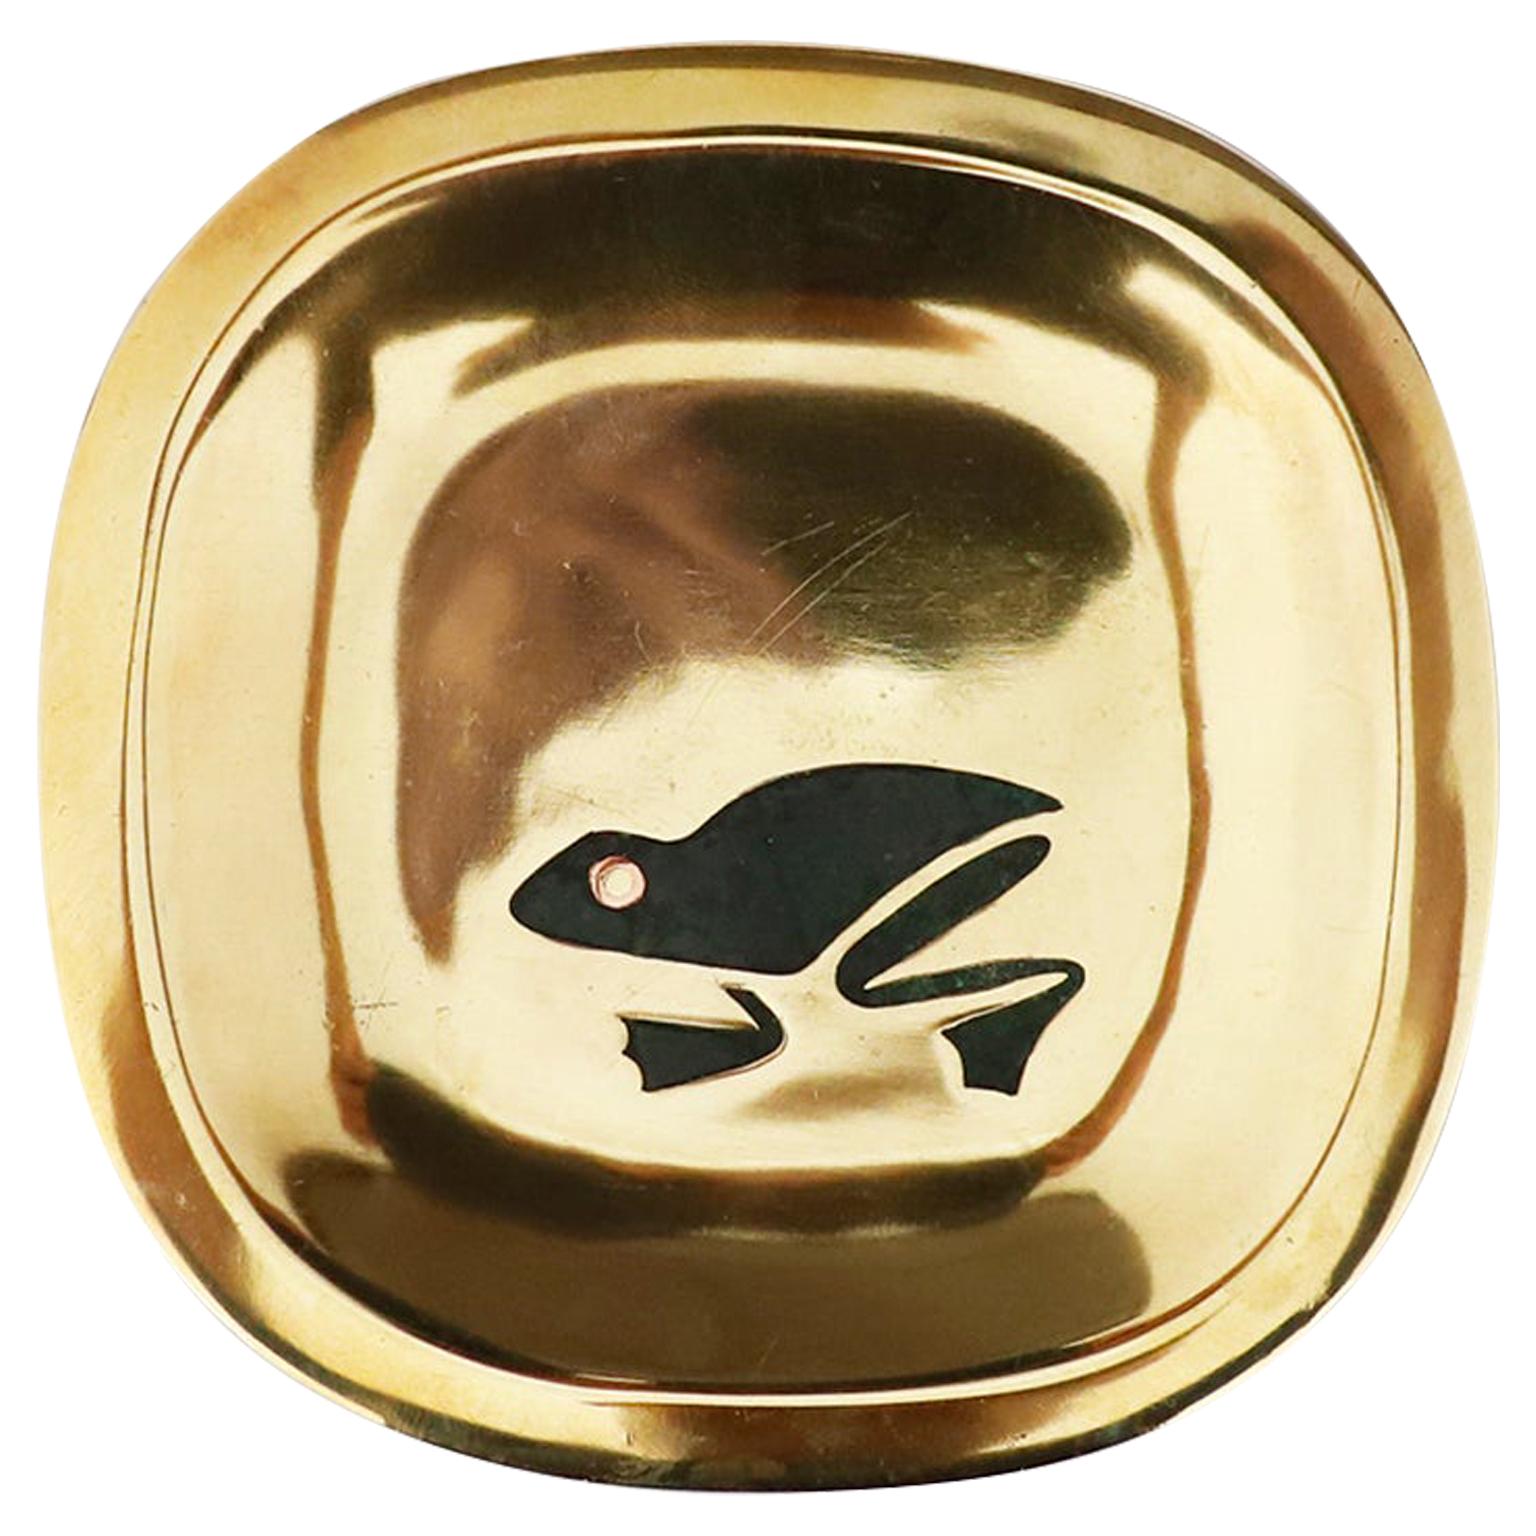 Petite Brass Dish with Frog Motif by Los Castillo